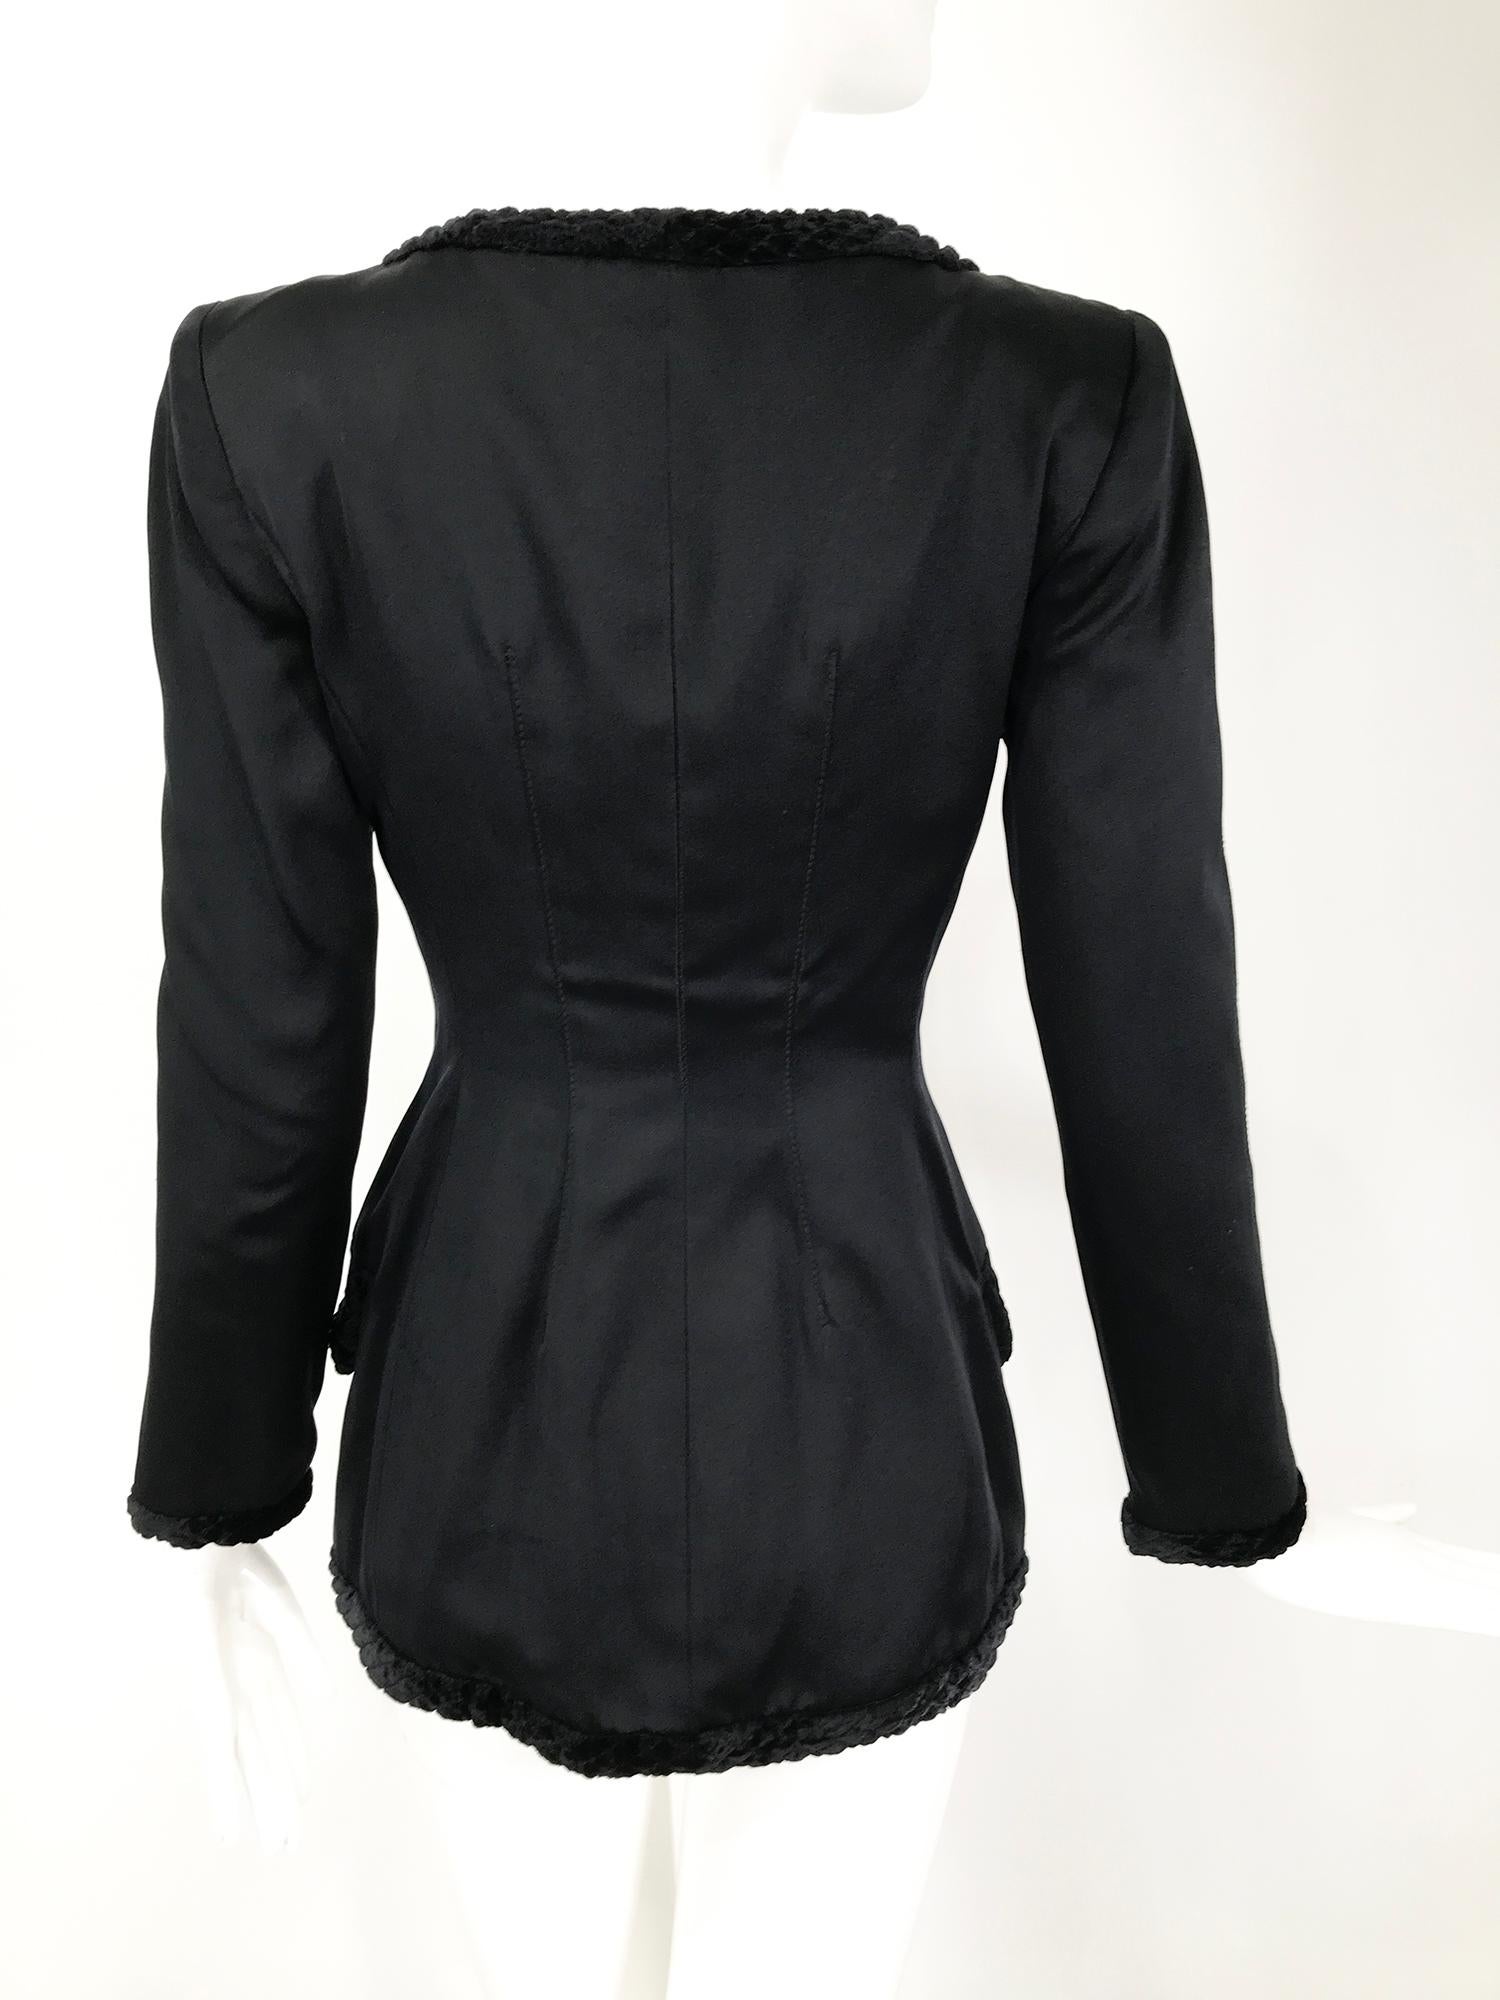 Valentino Black Silk Fitted Jewel Button Evening Jacket 1990s For Sale 2